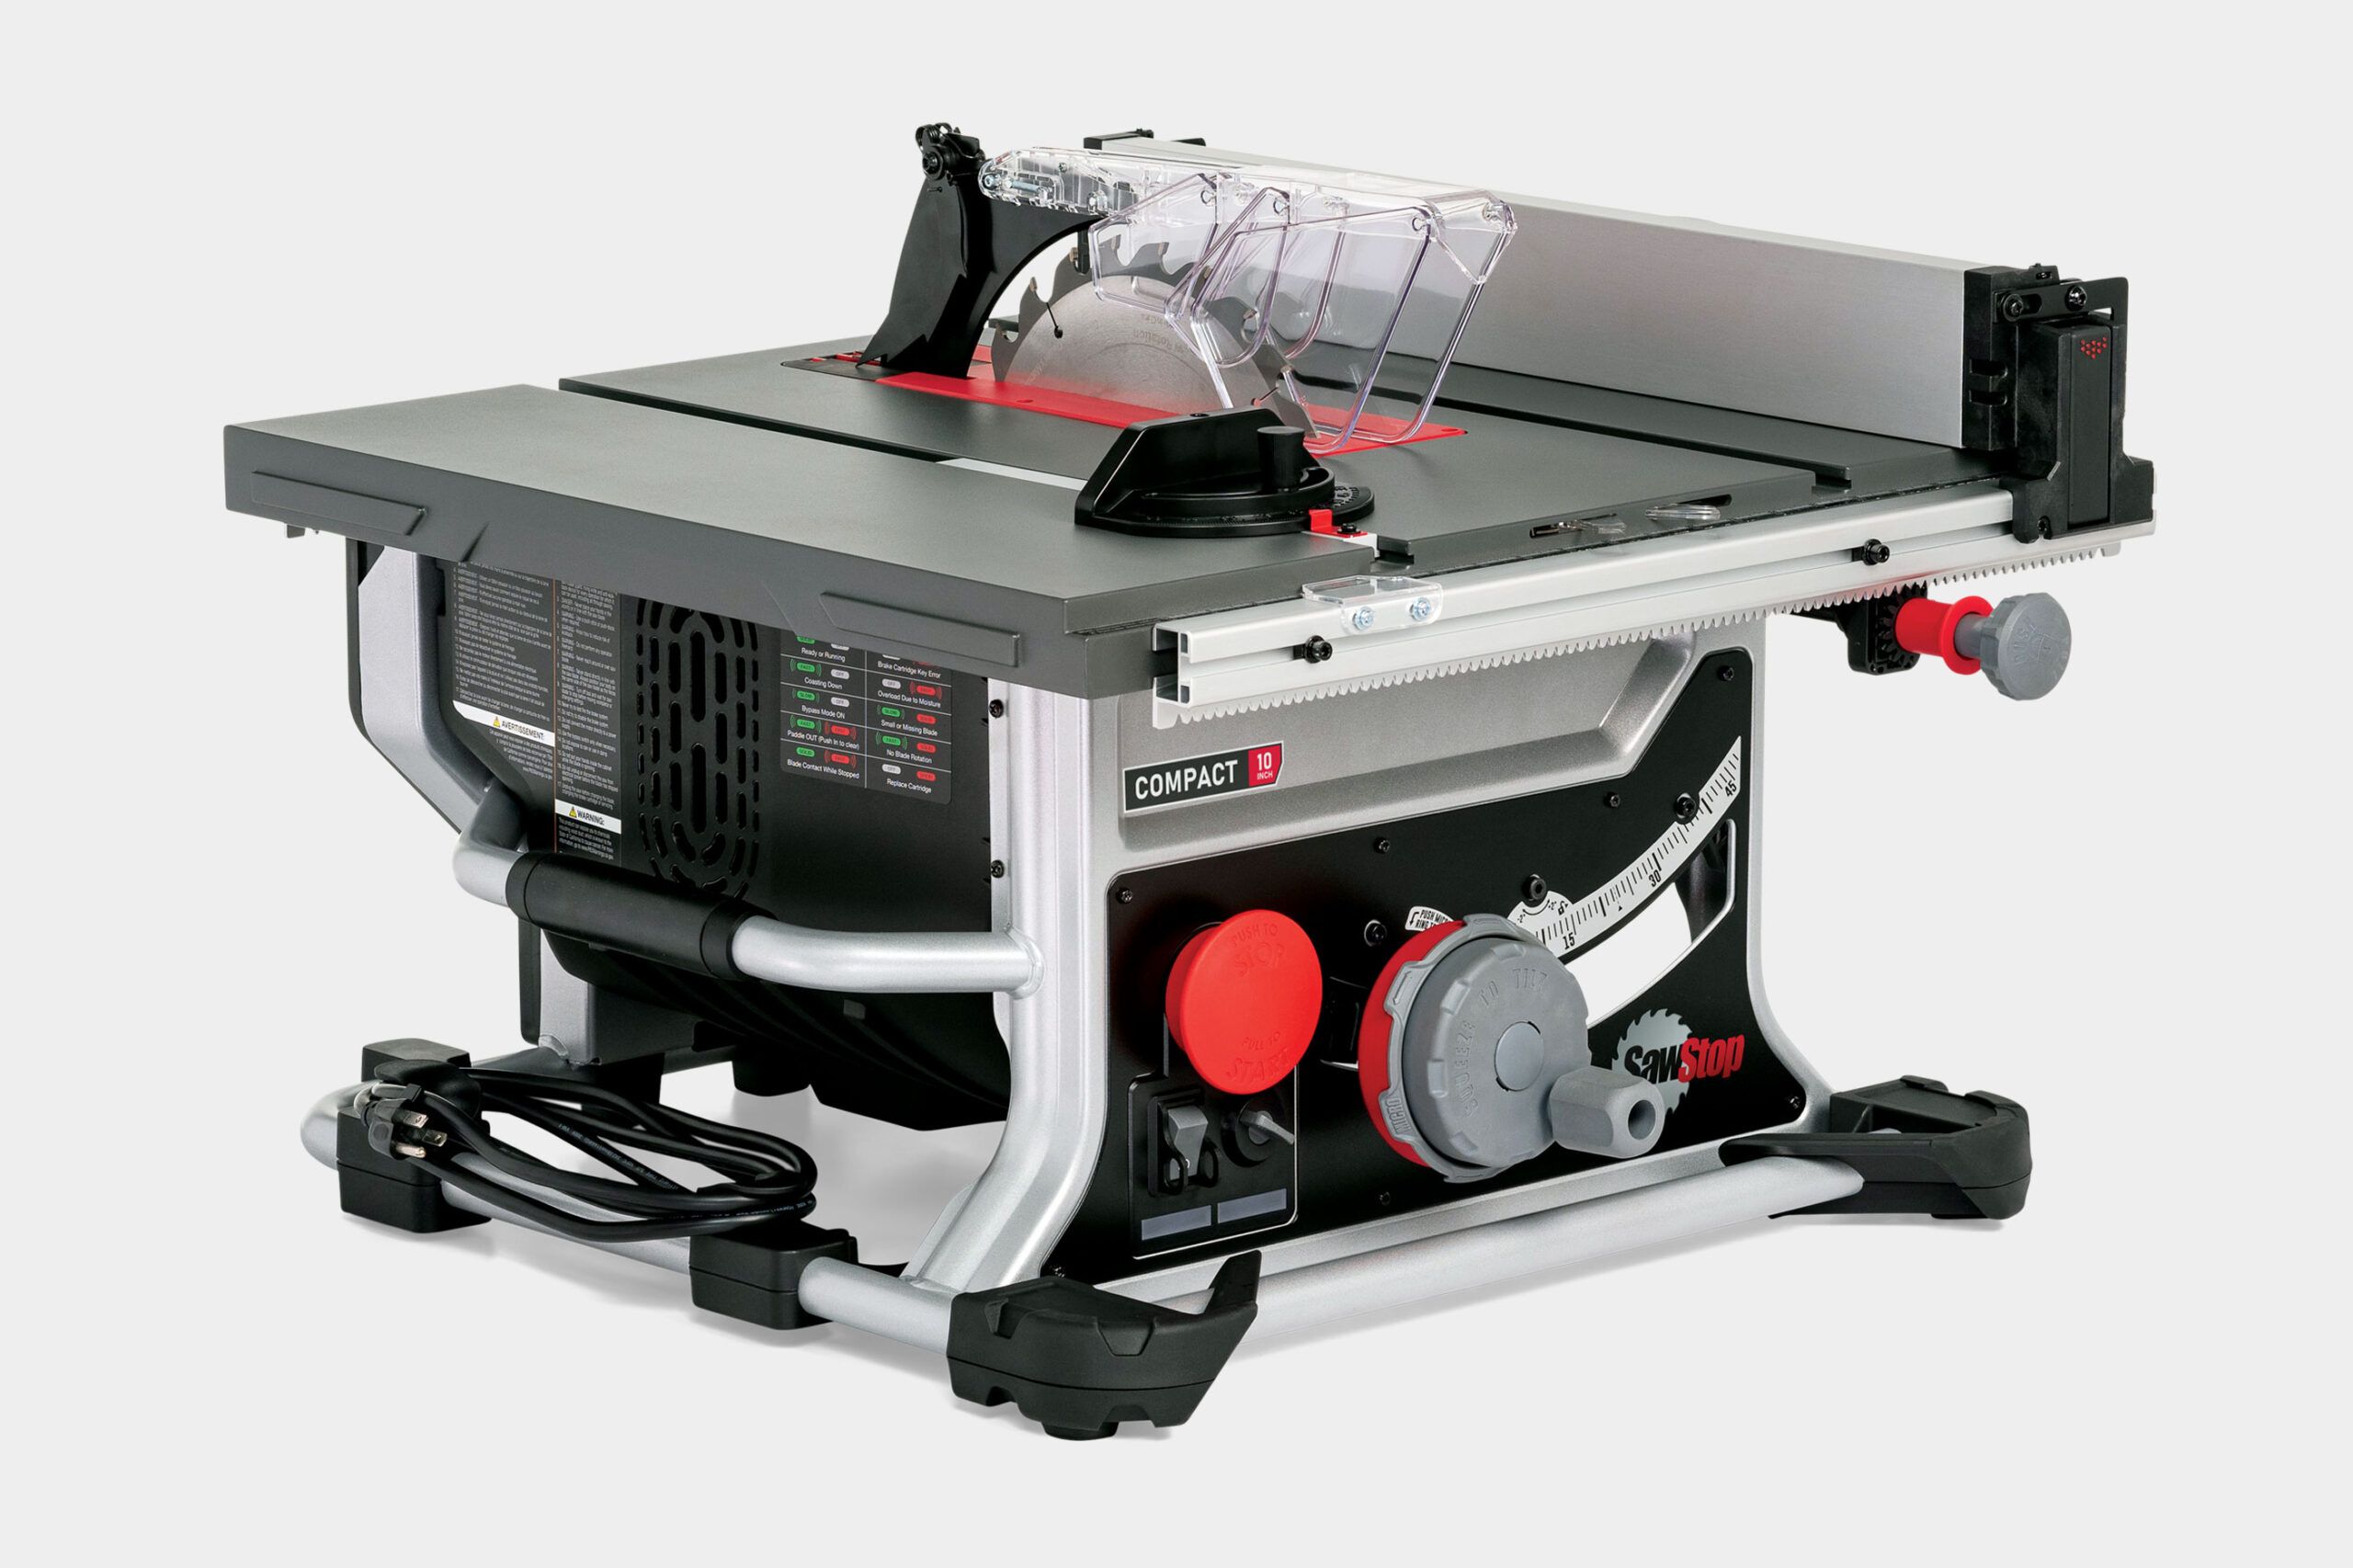 Compact Table Saw (CTS-120A60)